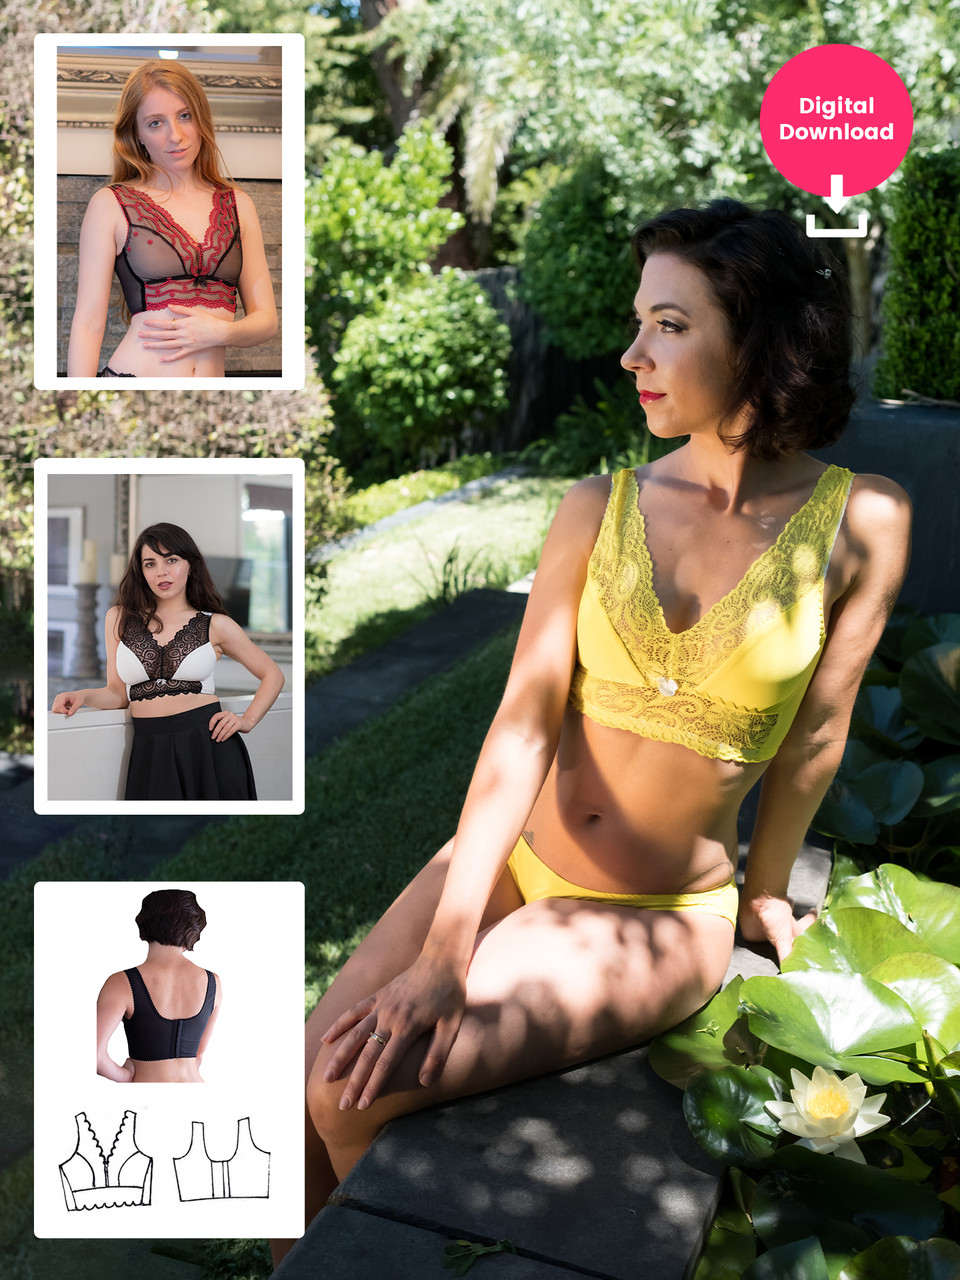 Finally! Sewing my own Lingerie : the Black Beauty Bra Review